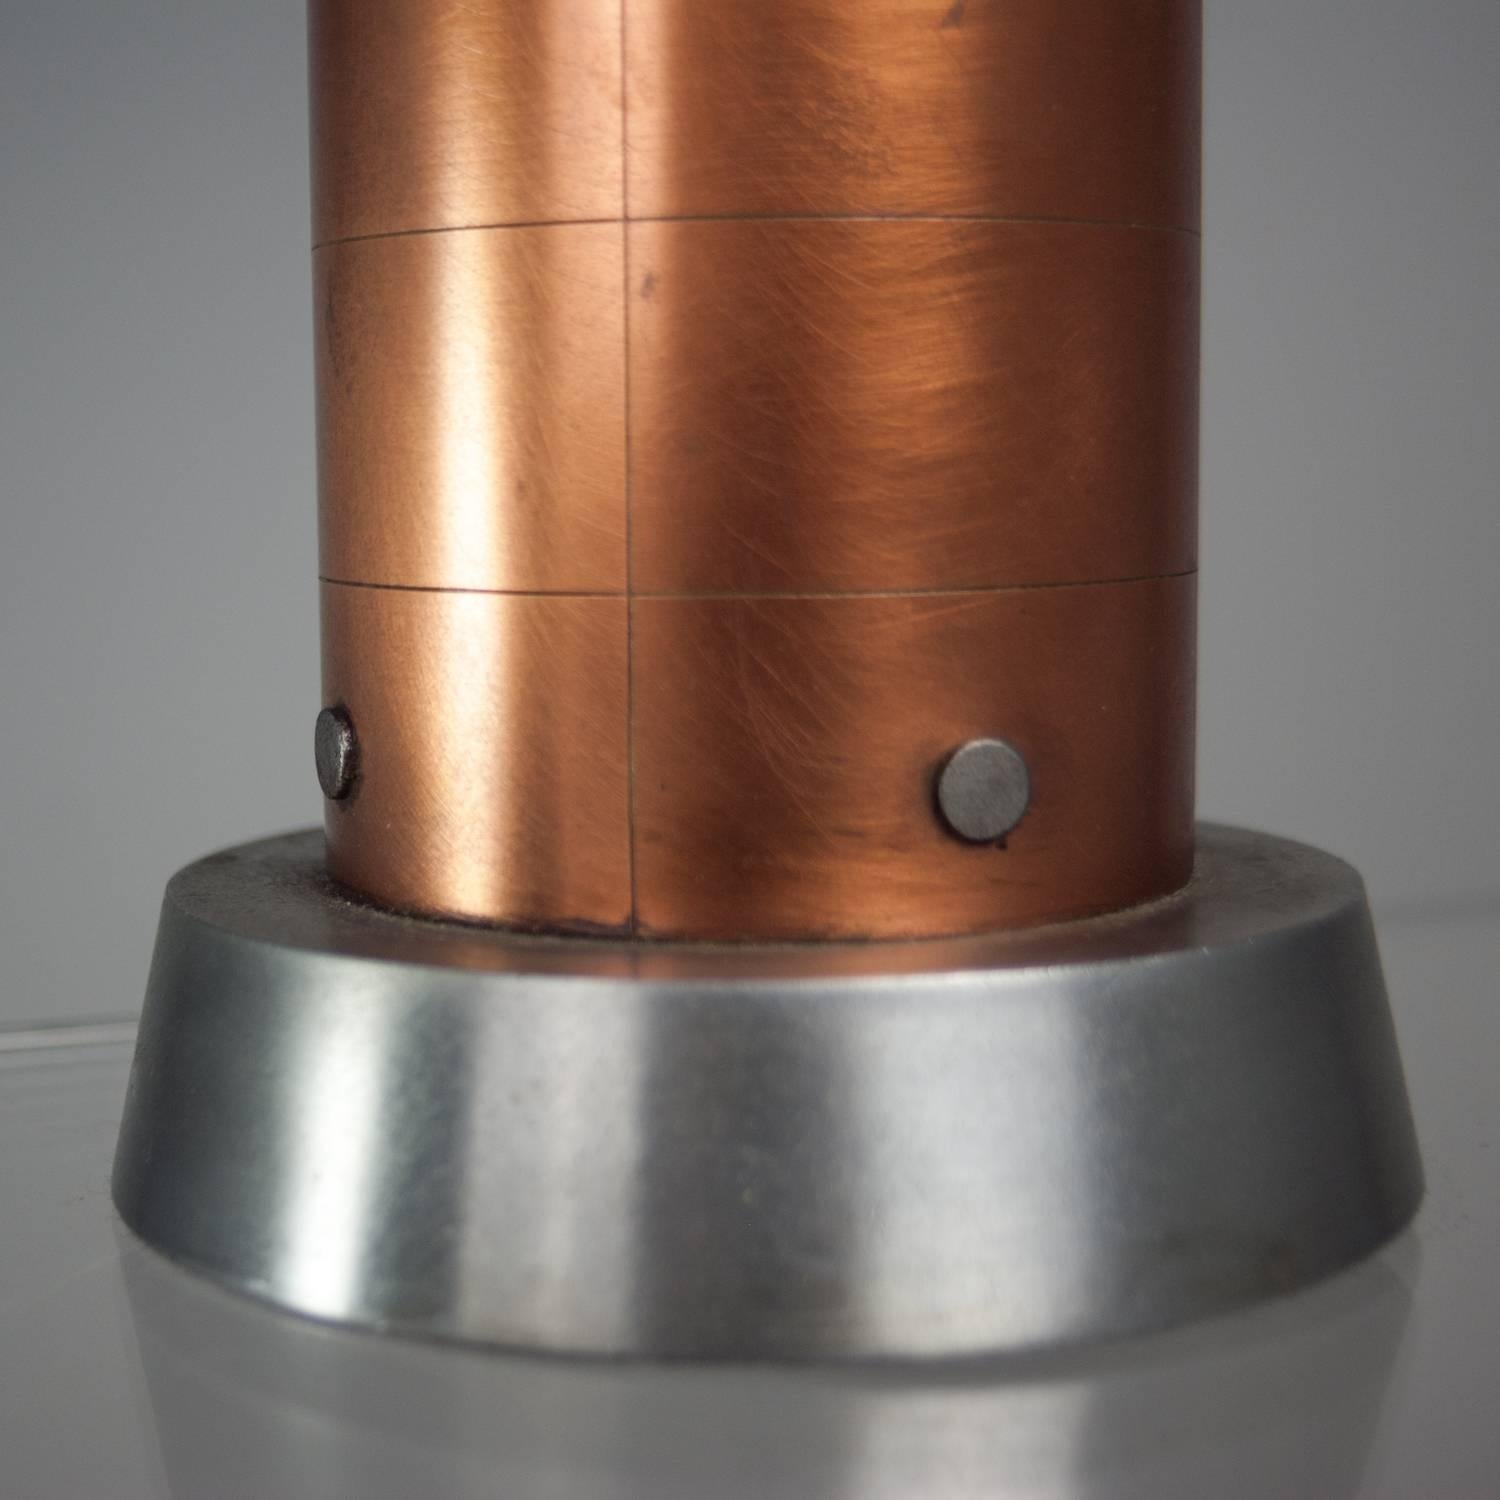 Spun copper and stainless steel Machine Age table lamp. Professionally rewired with black cloth cord, new ivory linen drum shade.